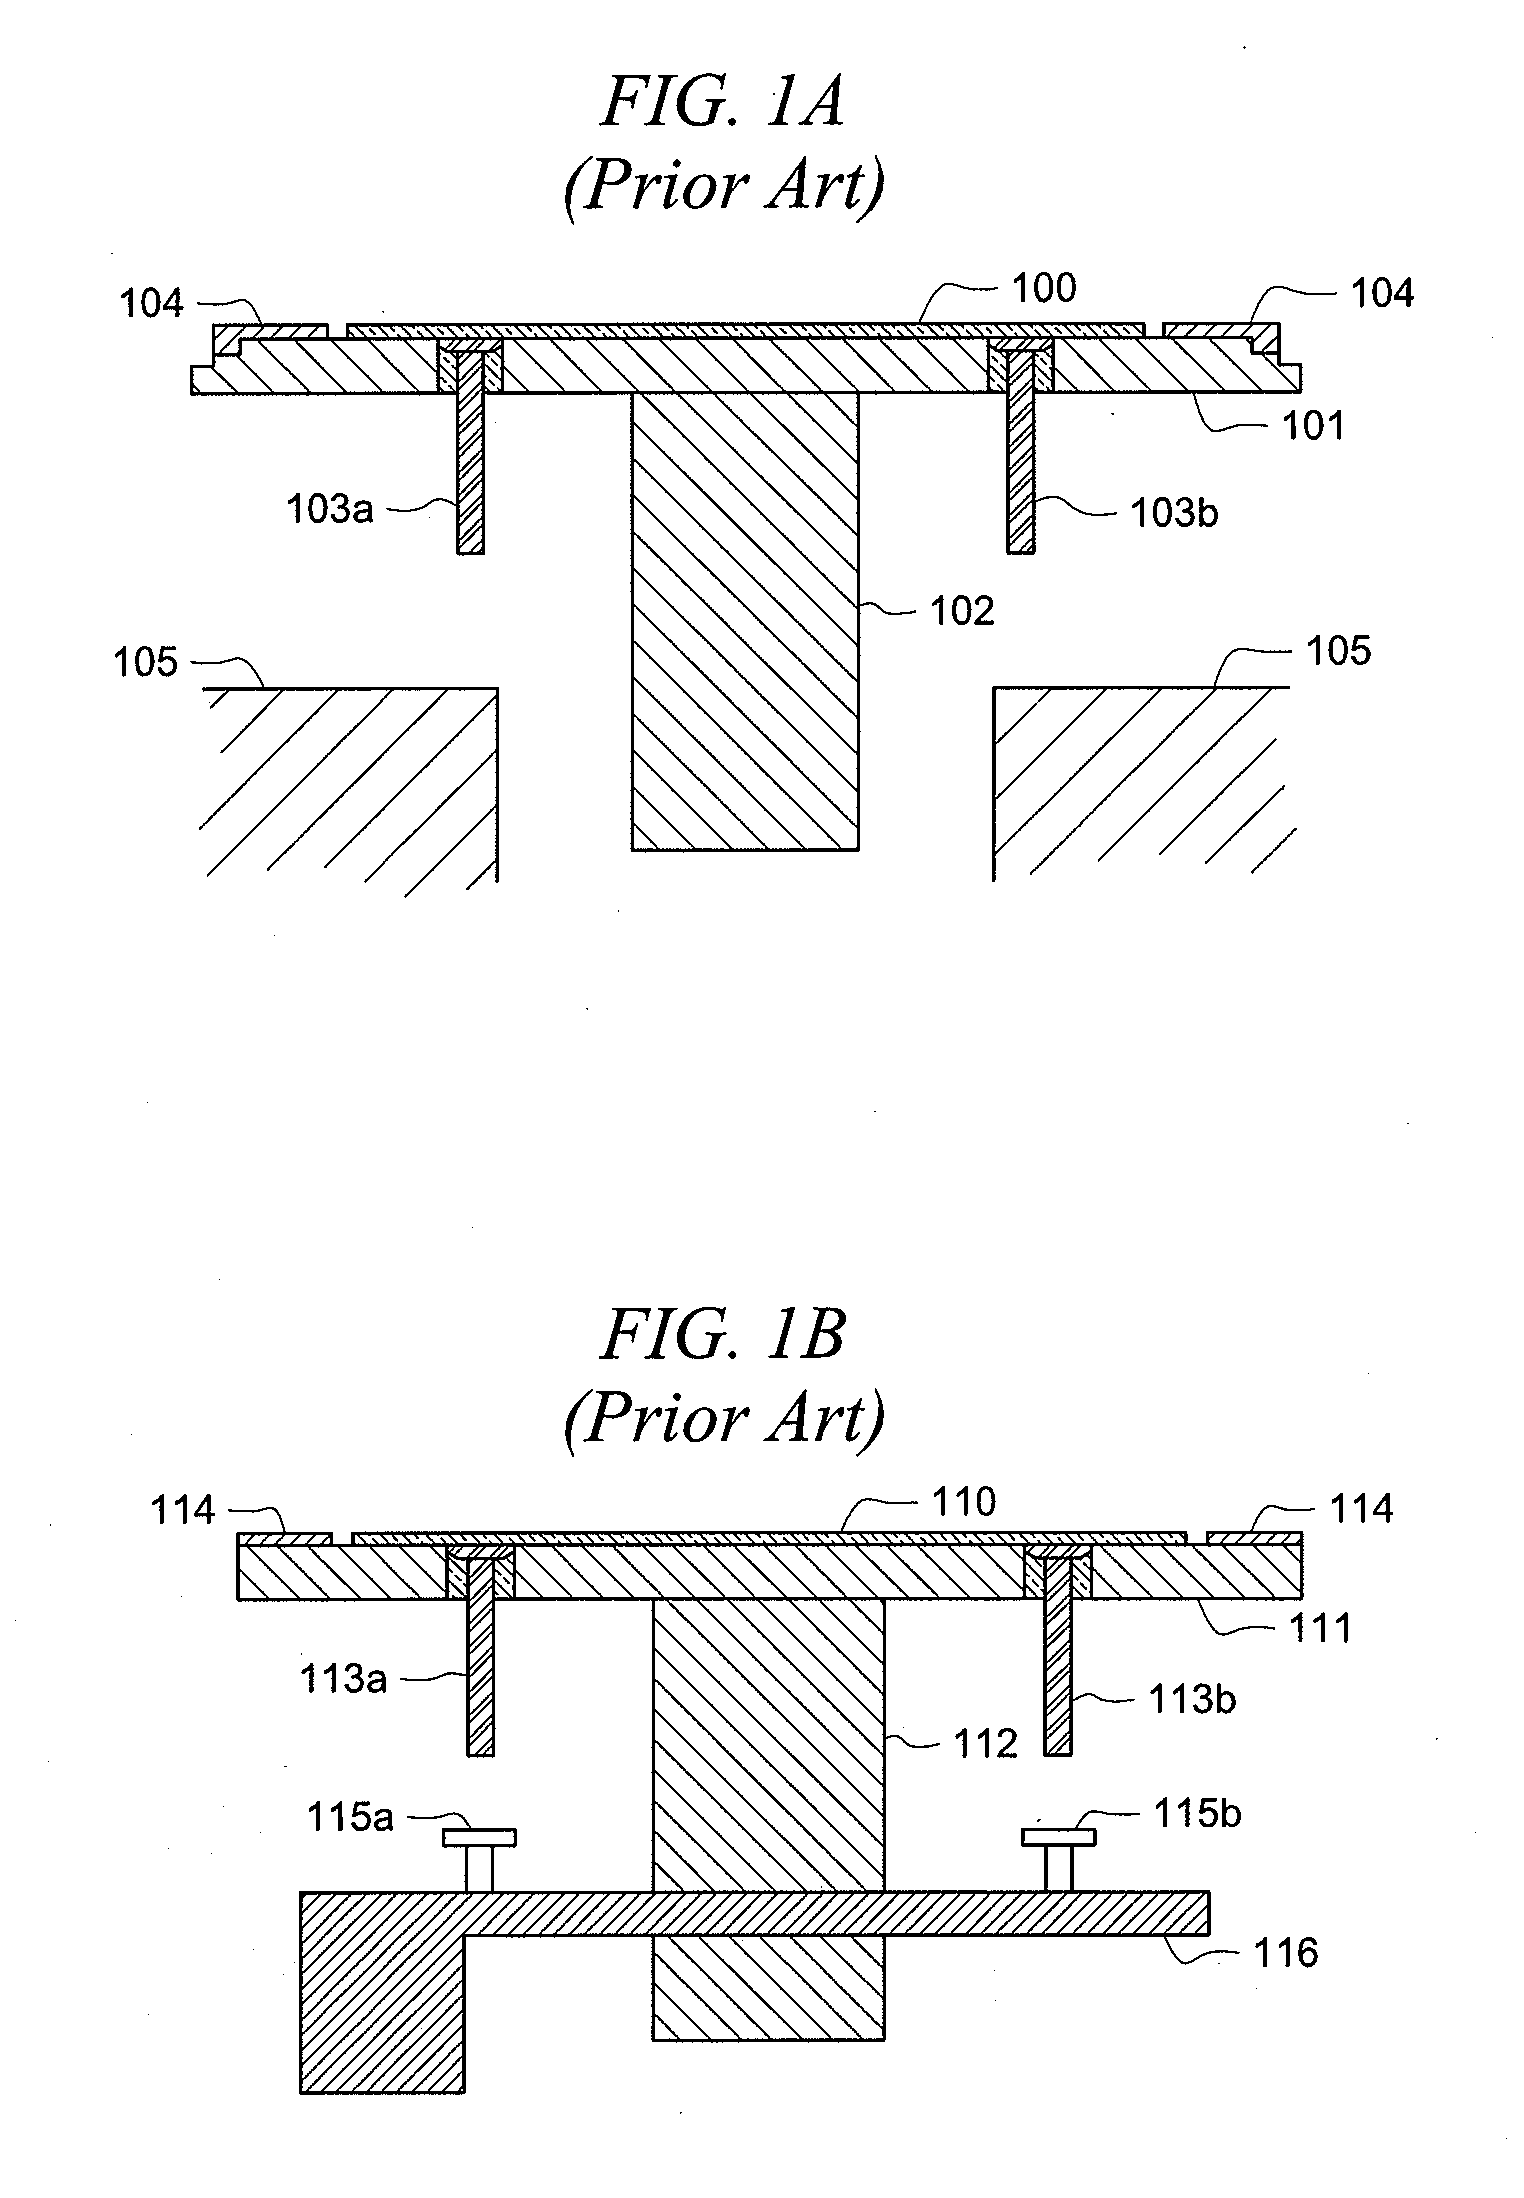 Automated systems and methods for adapting semiconductor fabrication tools to process wafers of different diameters